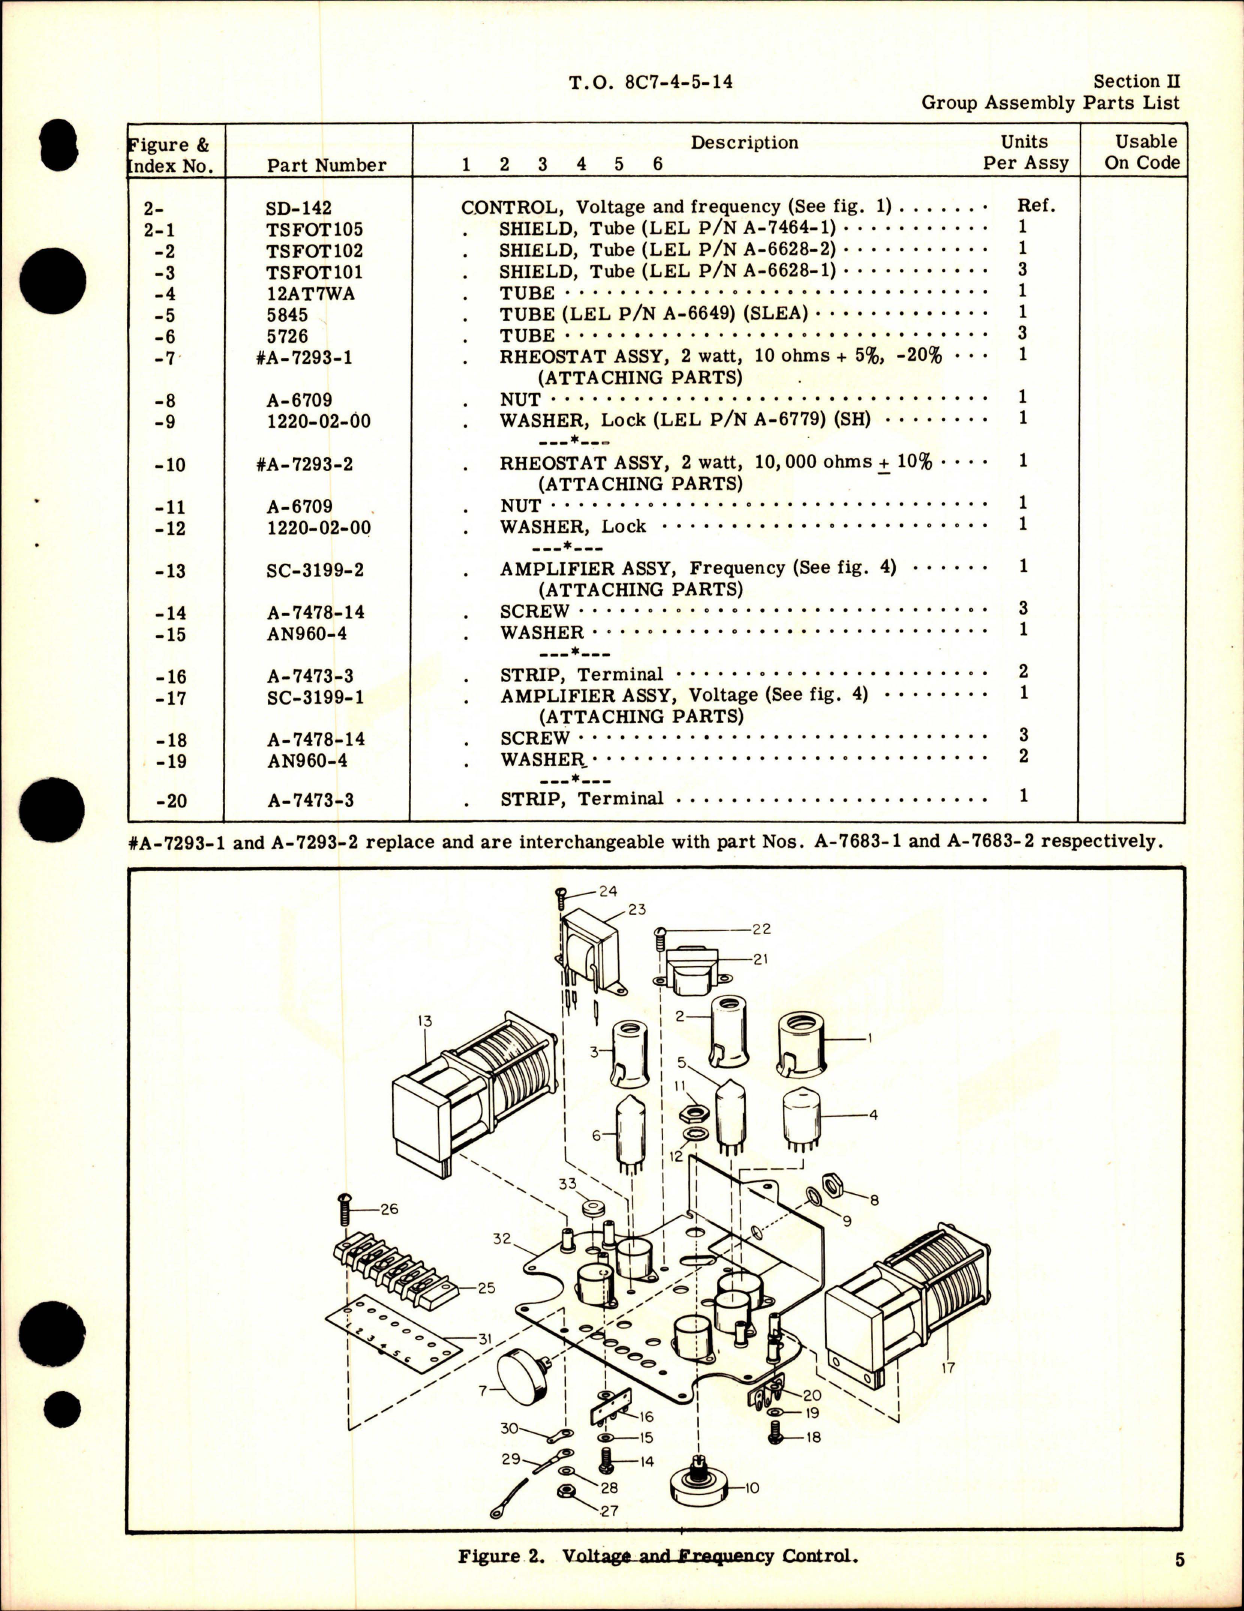 Sample page 9 from AirCorps Library document: Illustrated Parts Breakdown for AN 3534-1 Inverter - Part SE-2-1 and SE-2-2 